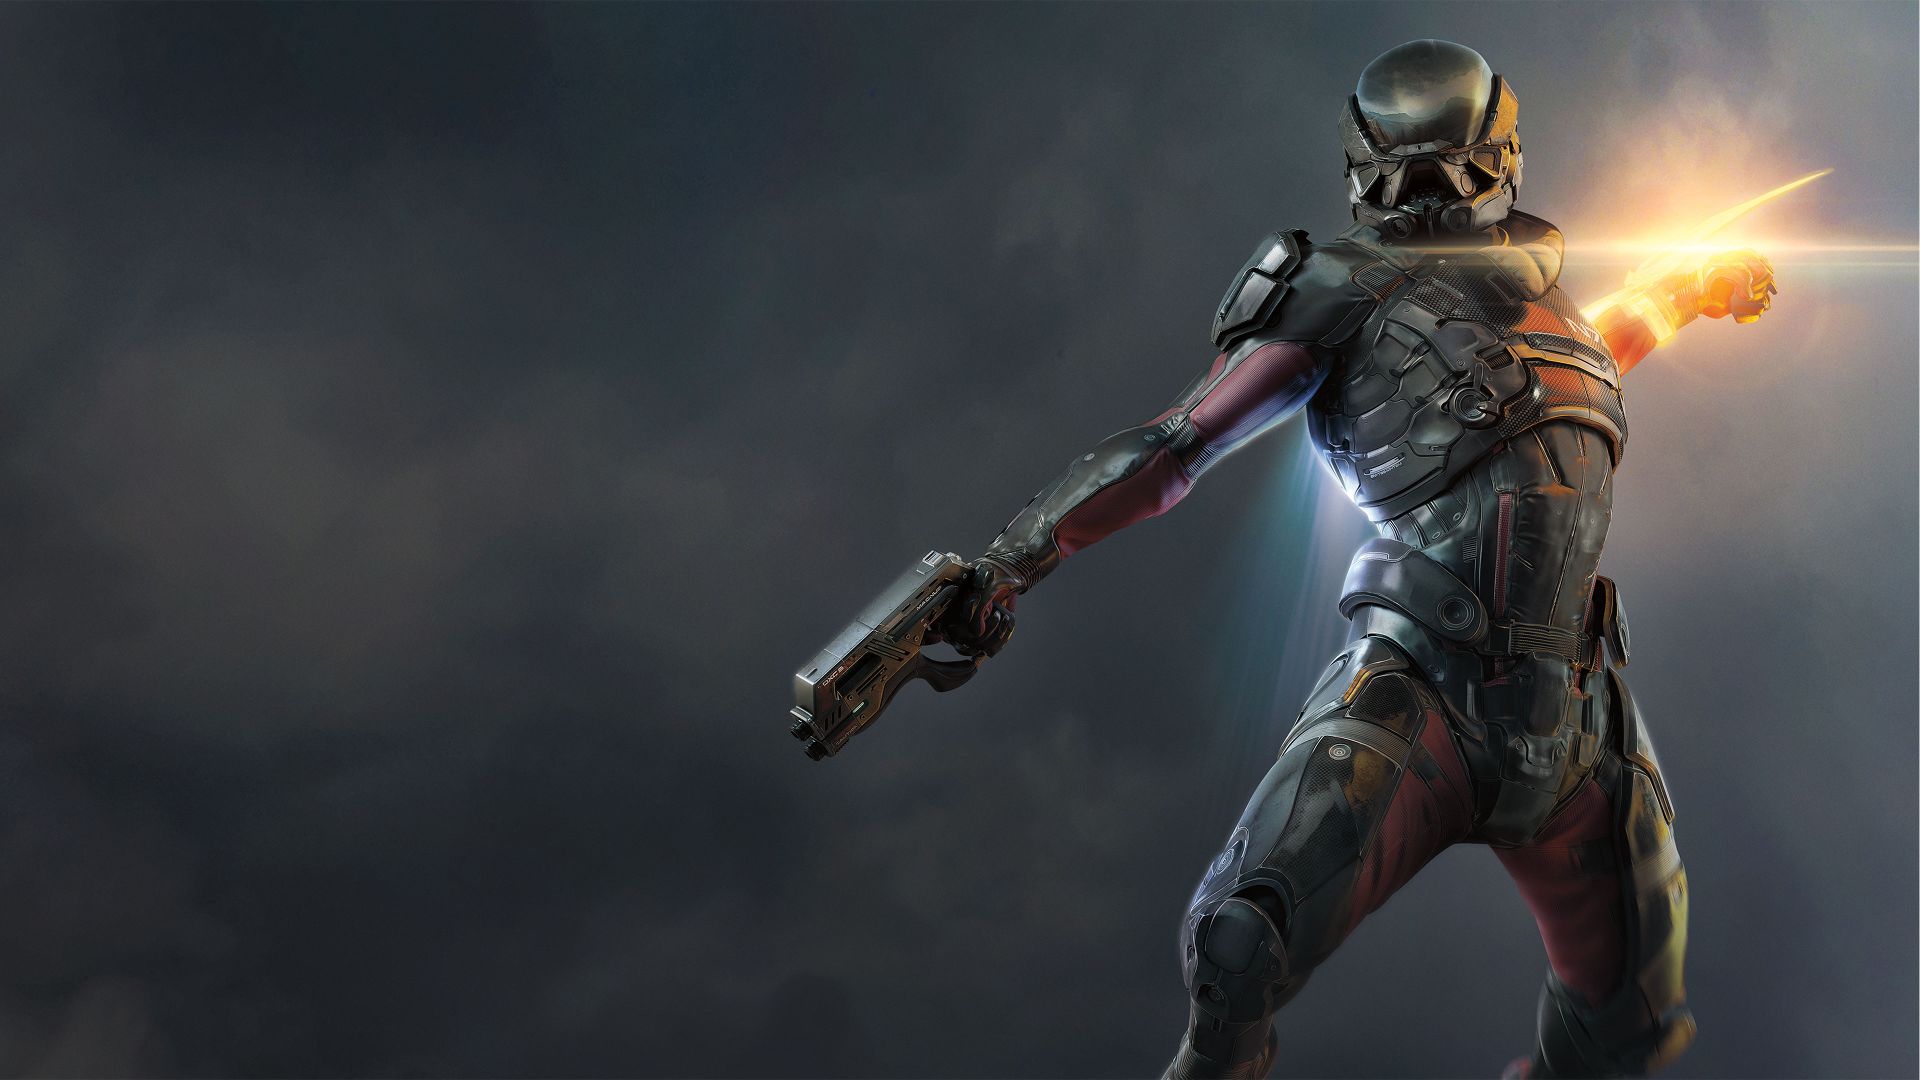 ‘Mass Effect: Andromeda’ Release Date Revealed